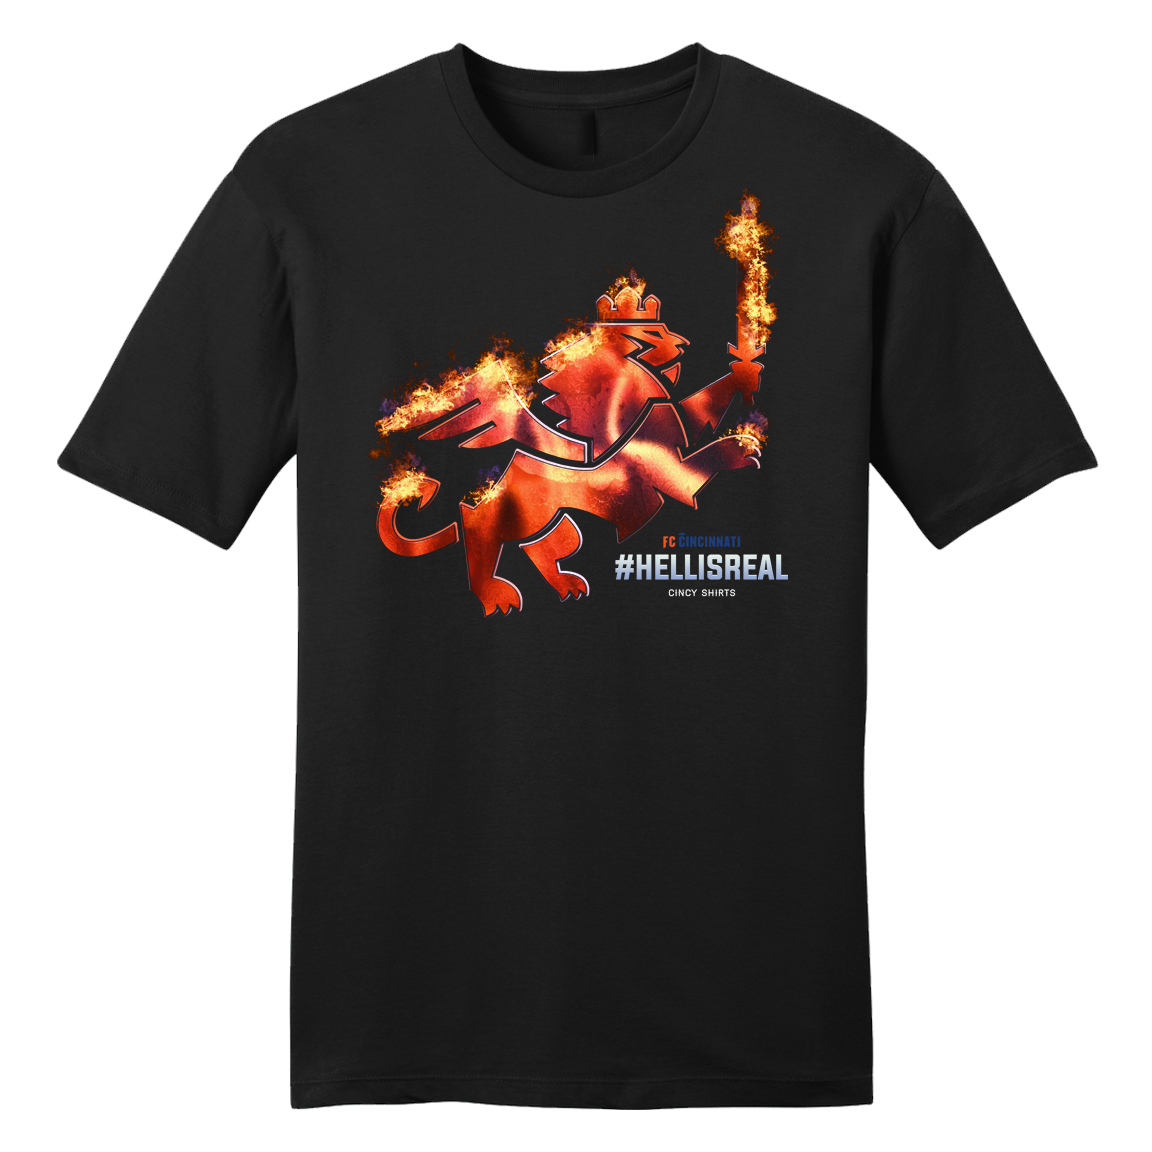 Hell Is Real - Fire Lion - Cincy Shirts